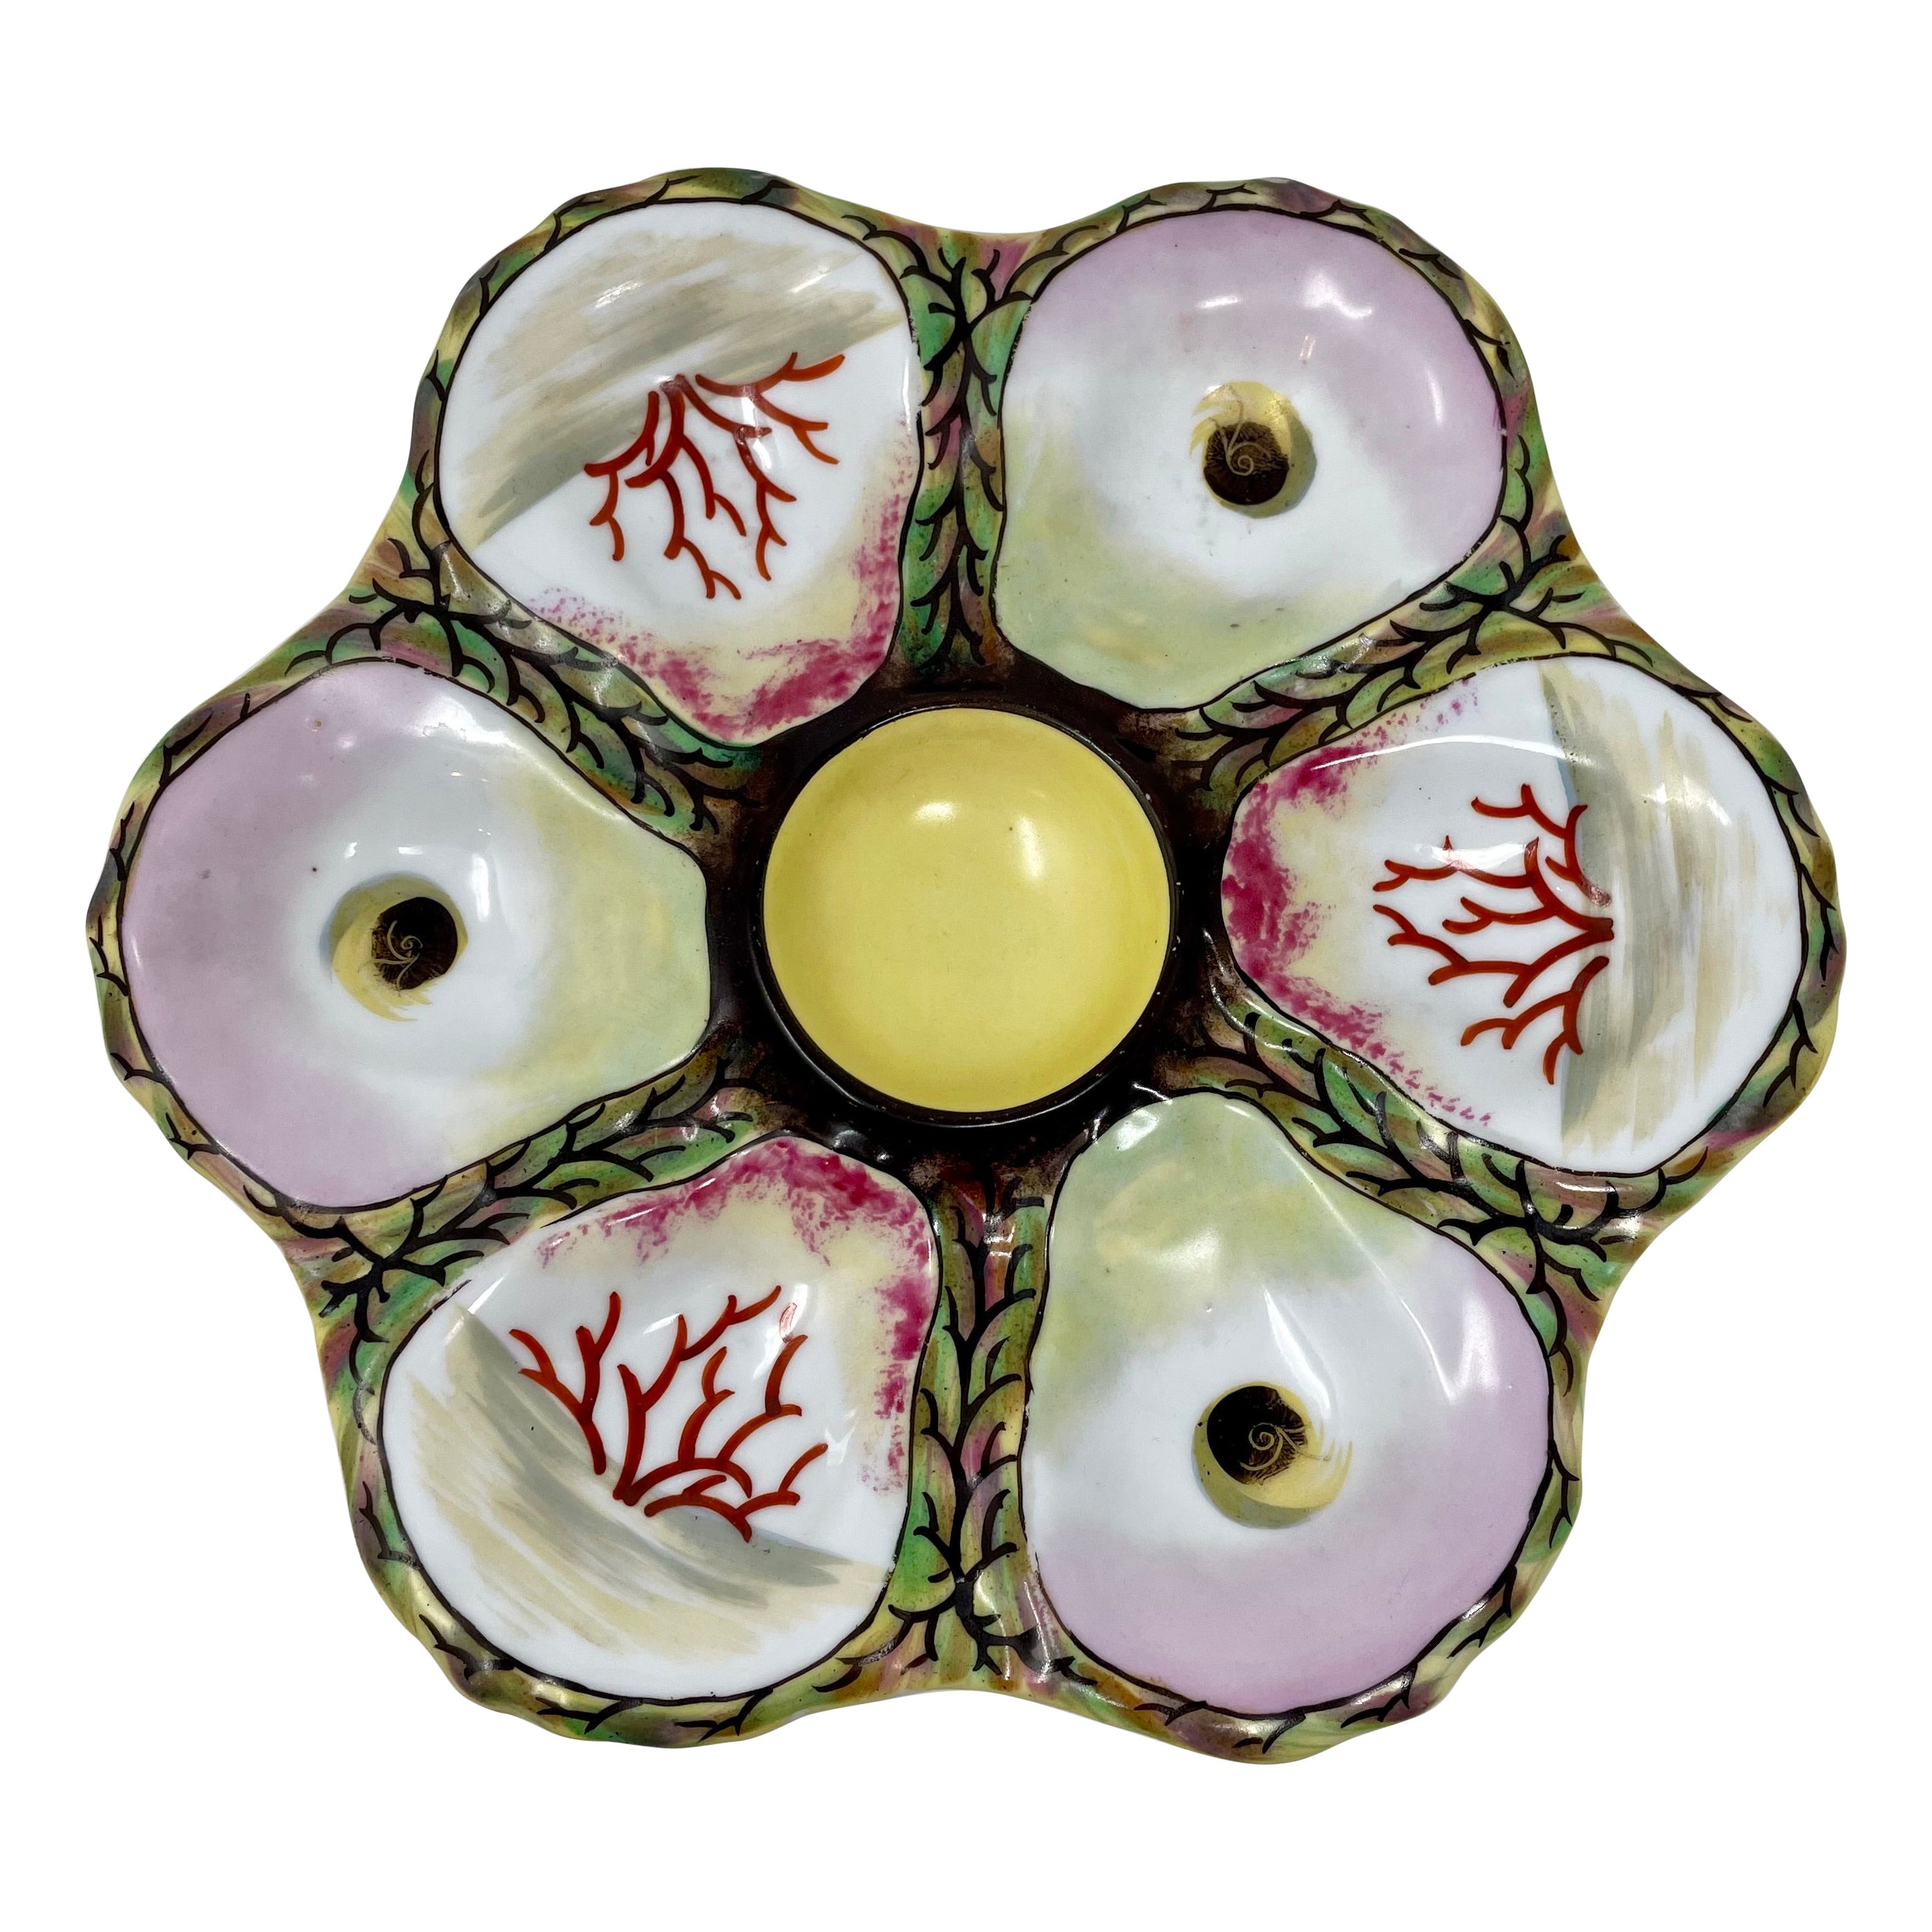 Antique German Hand-Painted Multi-Colored Porcelain Oyster Plate, Circa 1880.